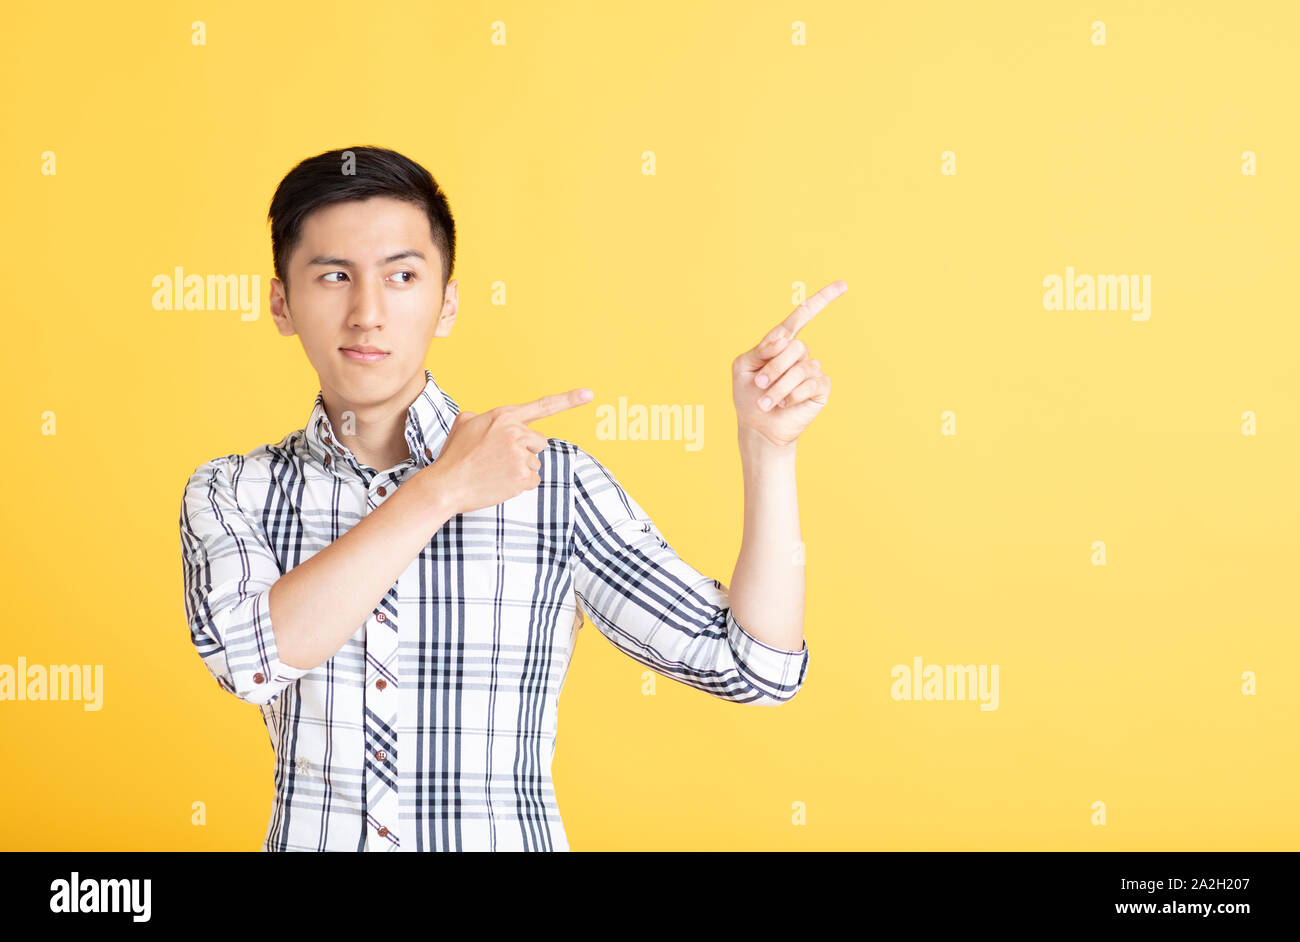 handsome young man pointing and showing Stock Photo